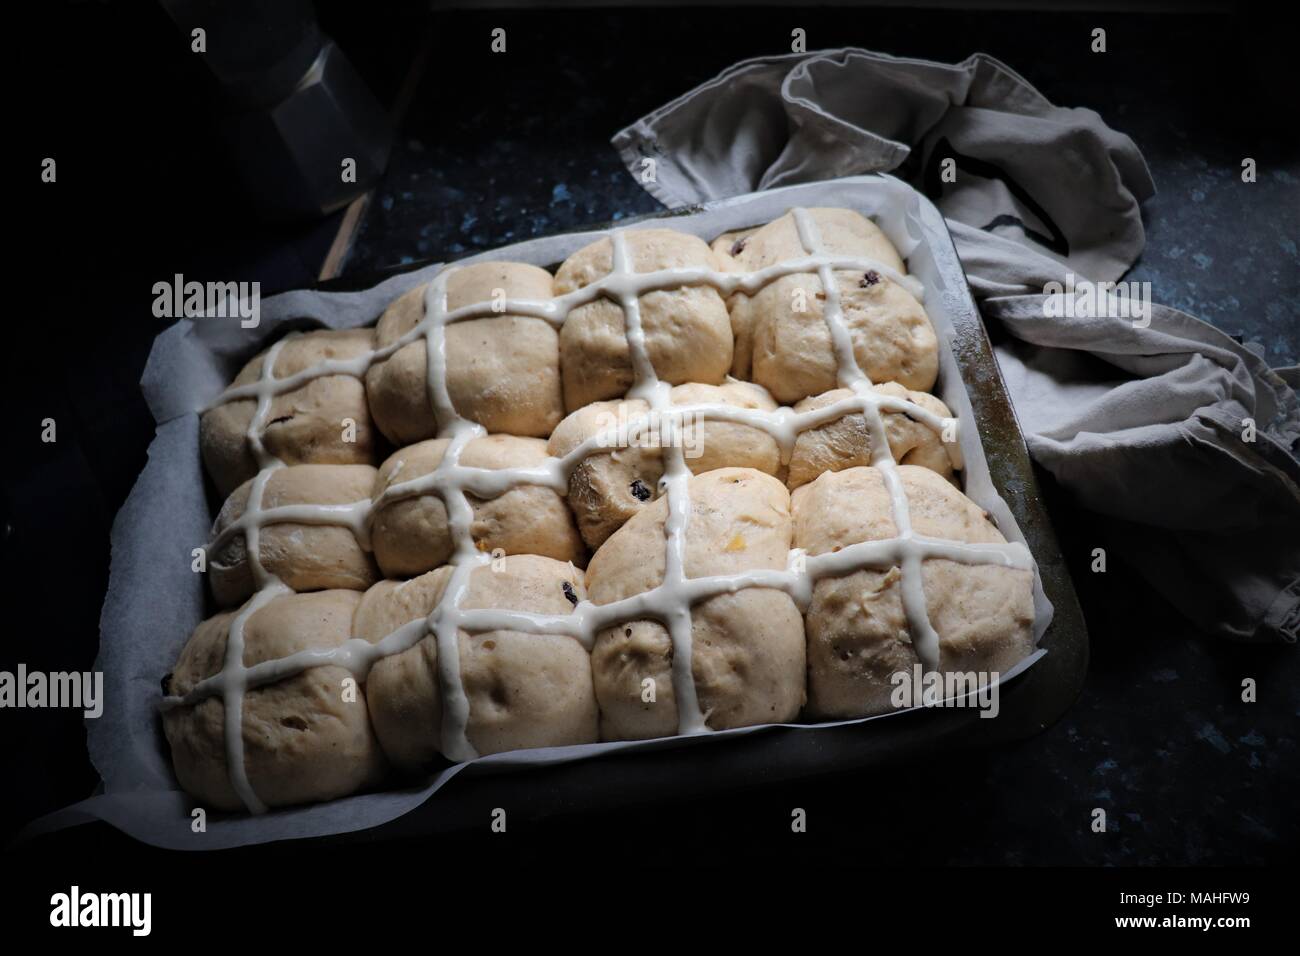 Home Made Hot Cross Buns About to go in the Oven Stock Photo